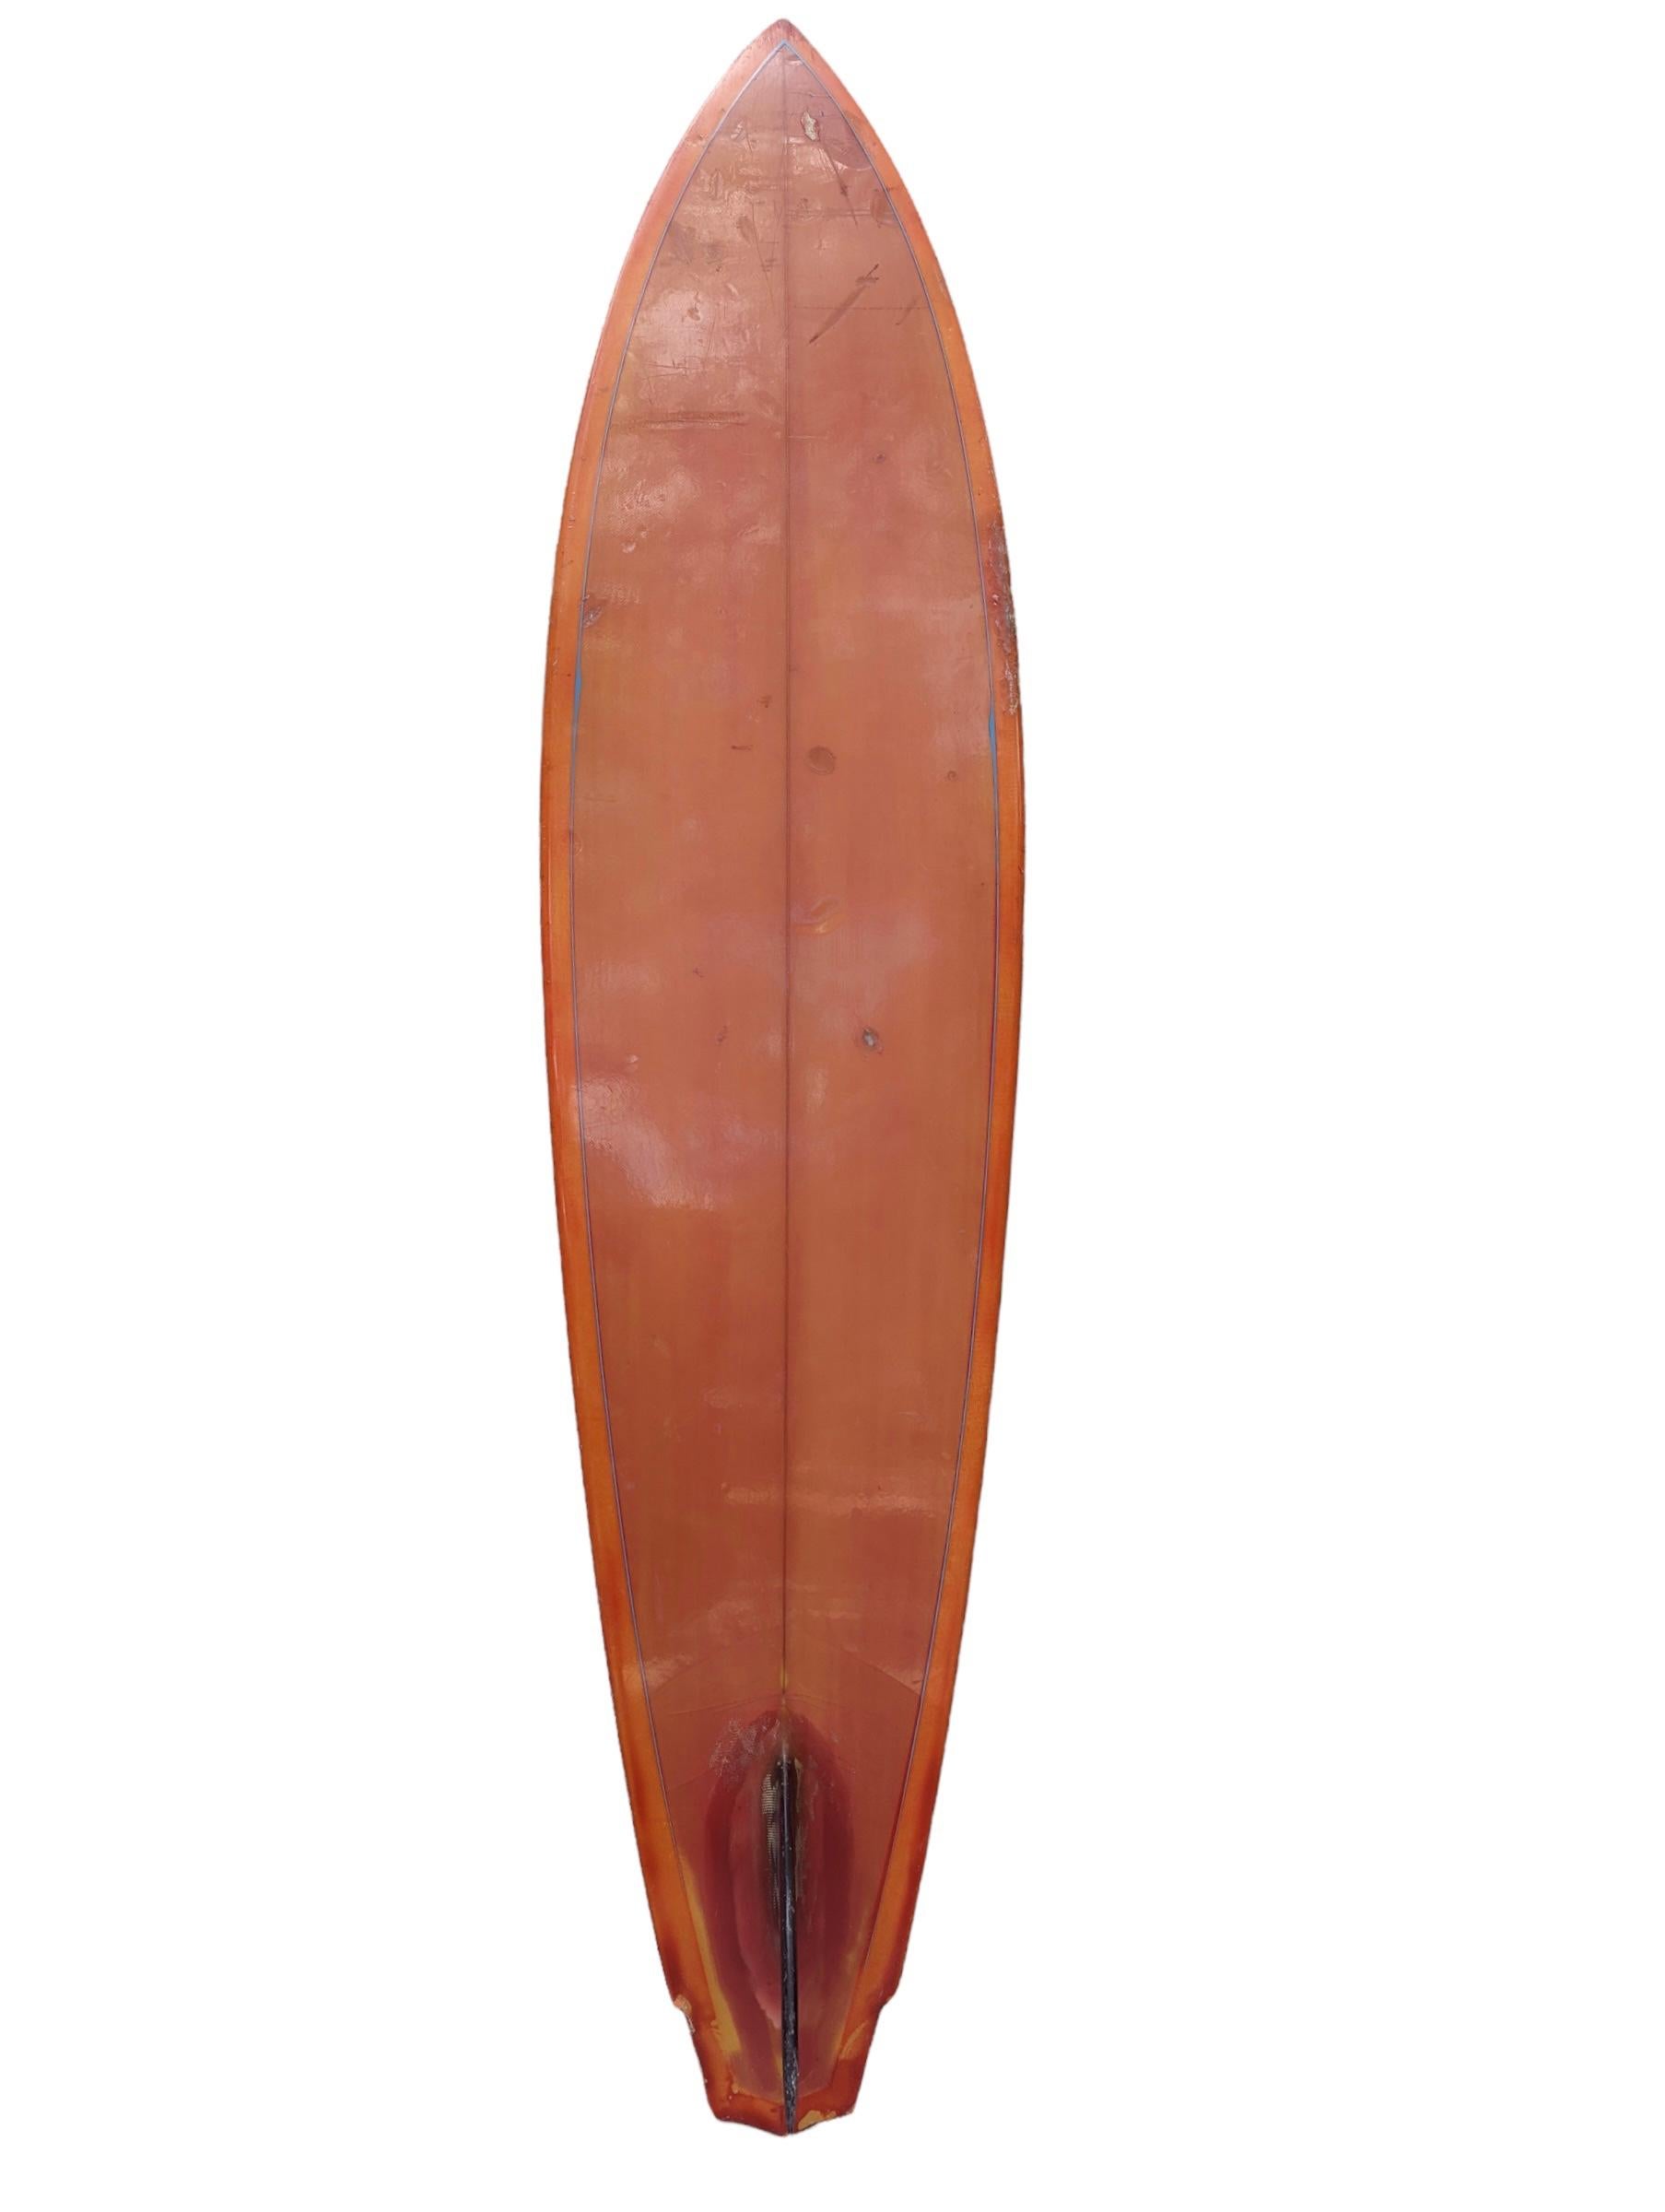 Mid-1970s Dick Brewer surfboard. Features an orange tint with uncommon rocket tail winged shape design. Glassed on single fin with pinstriped outline. A remarkable example of a 70s surfboard made under the coveted label of Dick Brewer Surfboards.